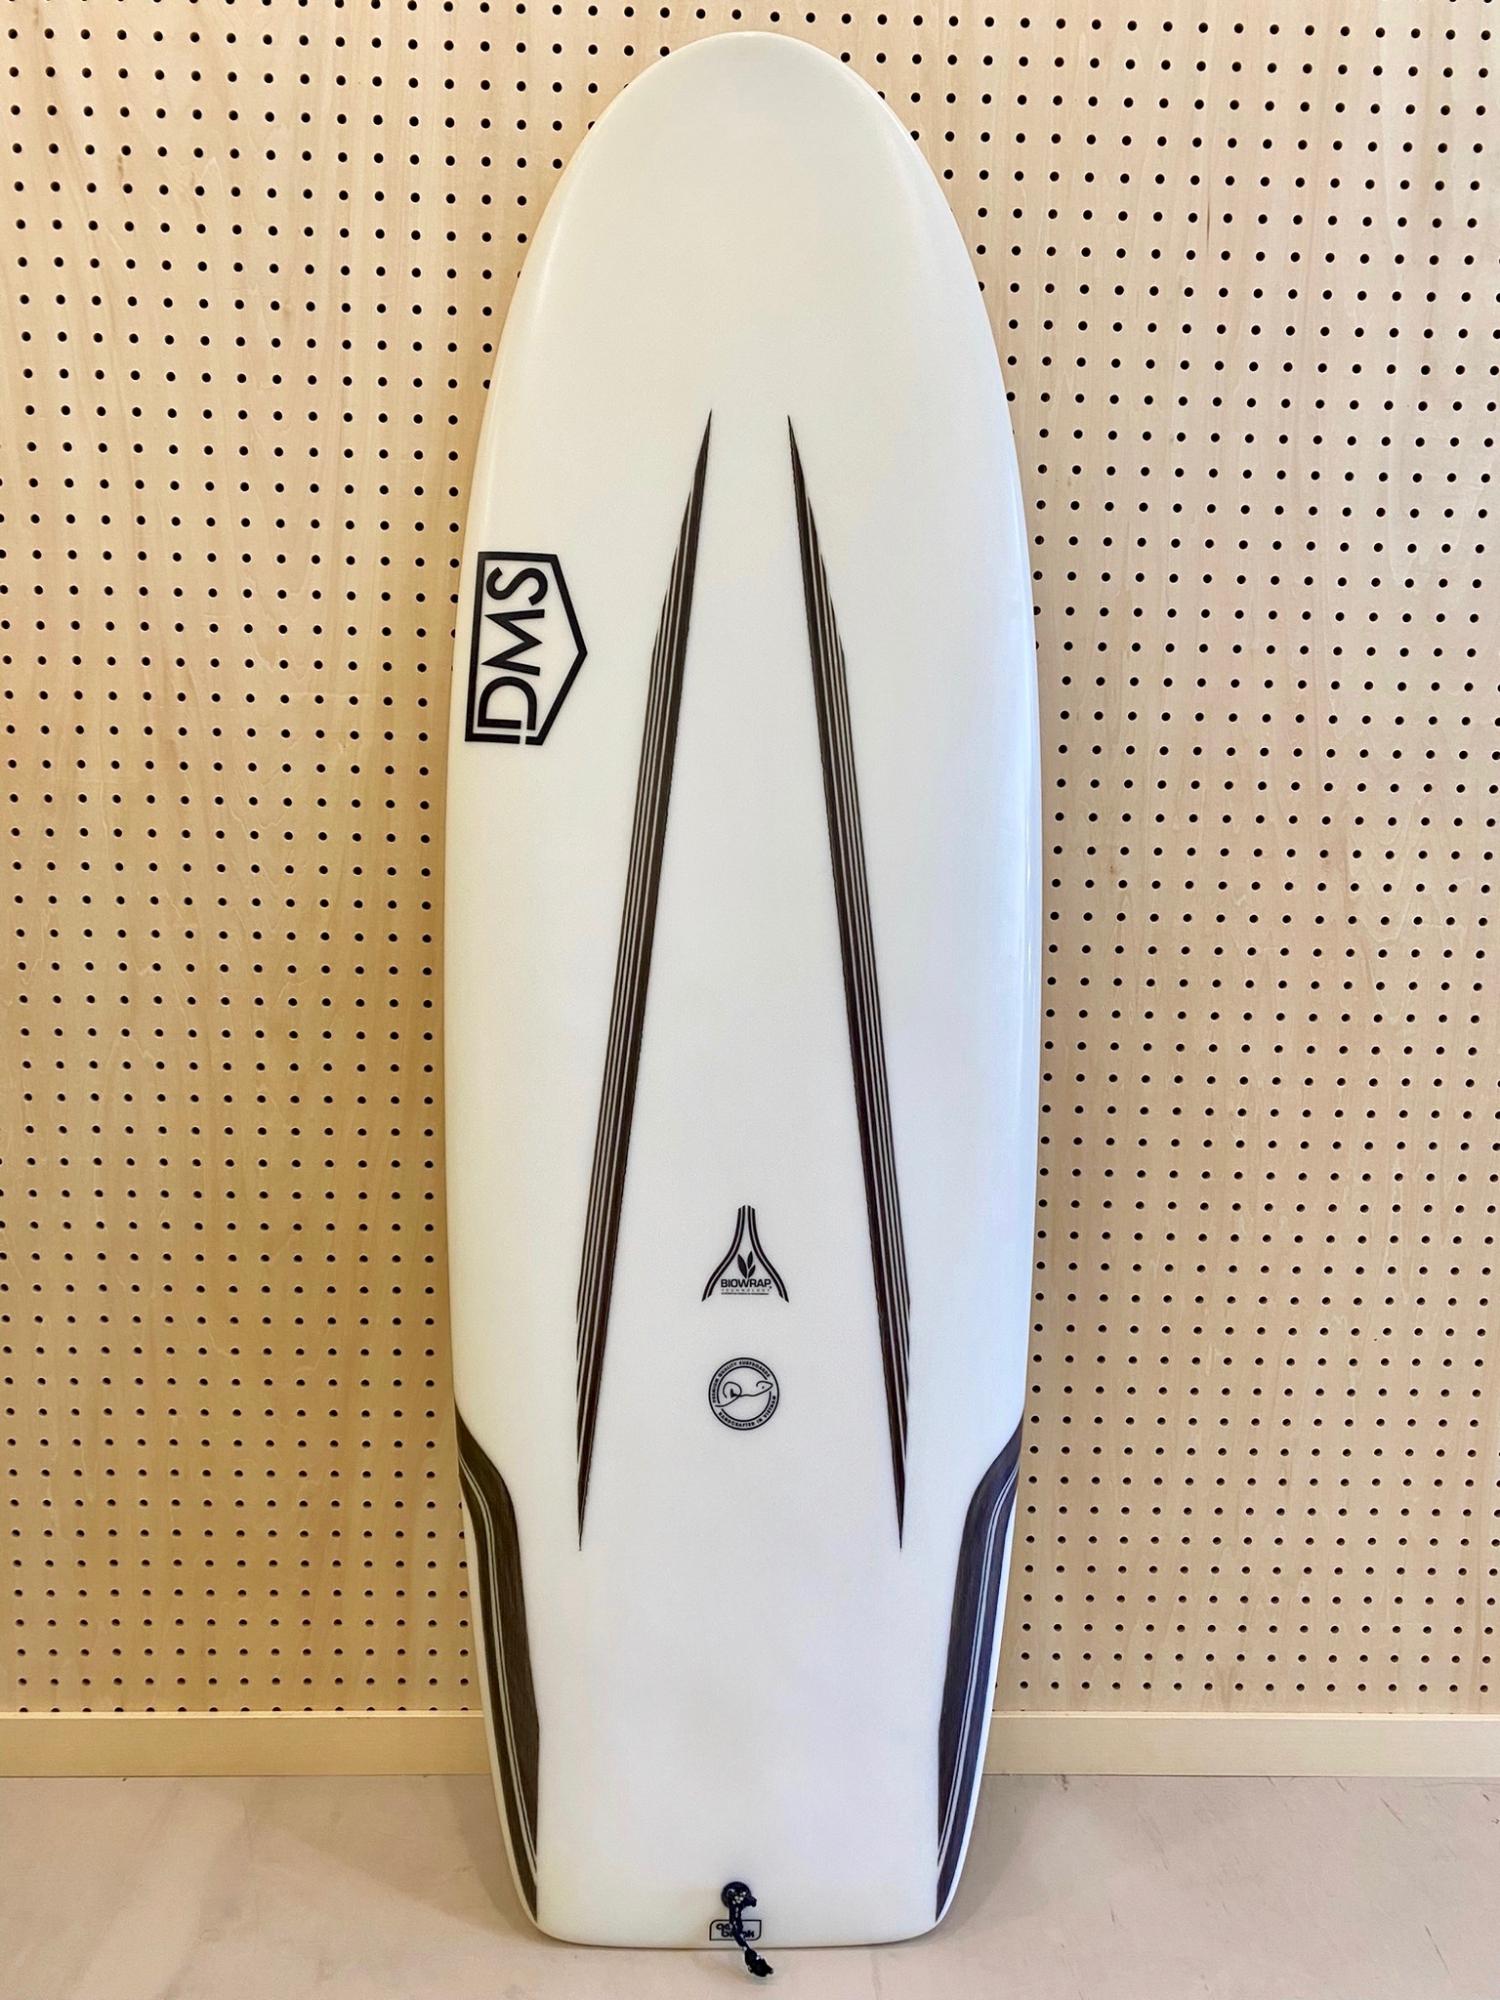 USED BOARDS (DMS Surfboards Valium 5.2)